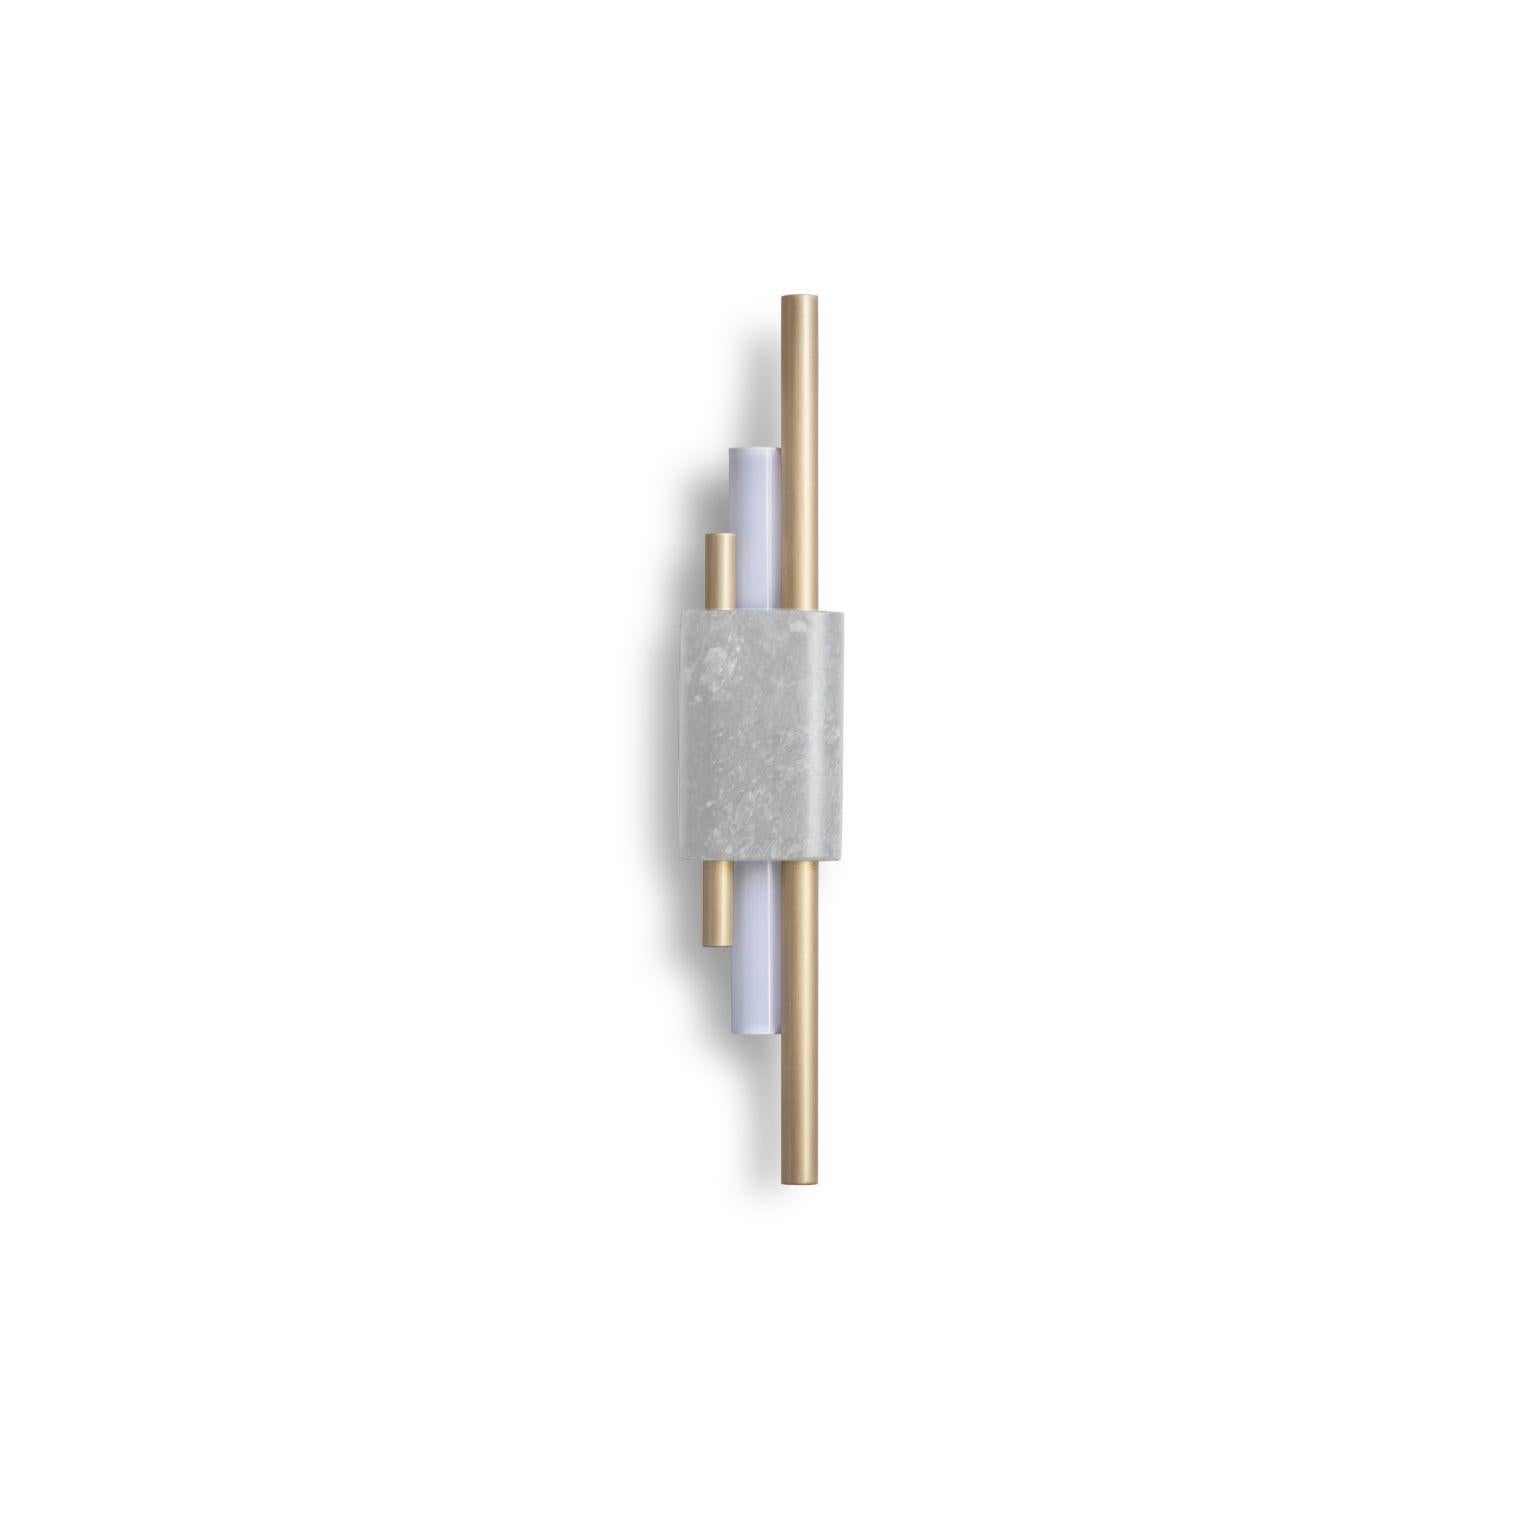 Tanto wall light - Small - White by Bert Frank
Dimensions: 45 x 9 x 9 cm
Materials: Brushed brass, white Carrara marble

When Adam Yeats and Robbie Llewellyn founded Bert Frank in 2013 it was a meeting of minds and the start of a collaborative